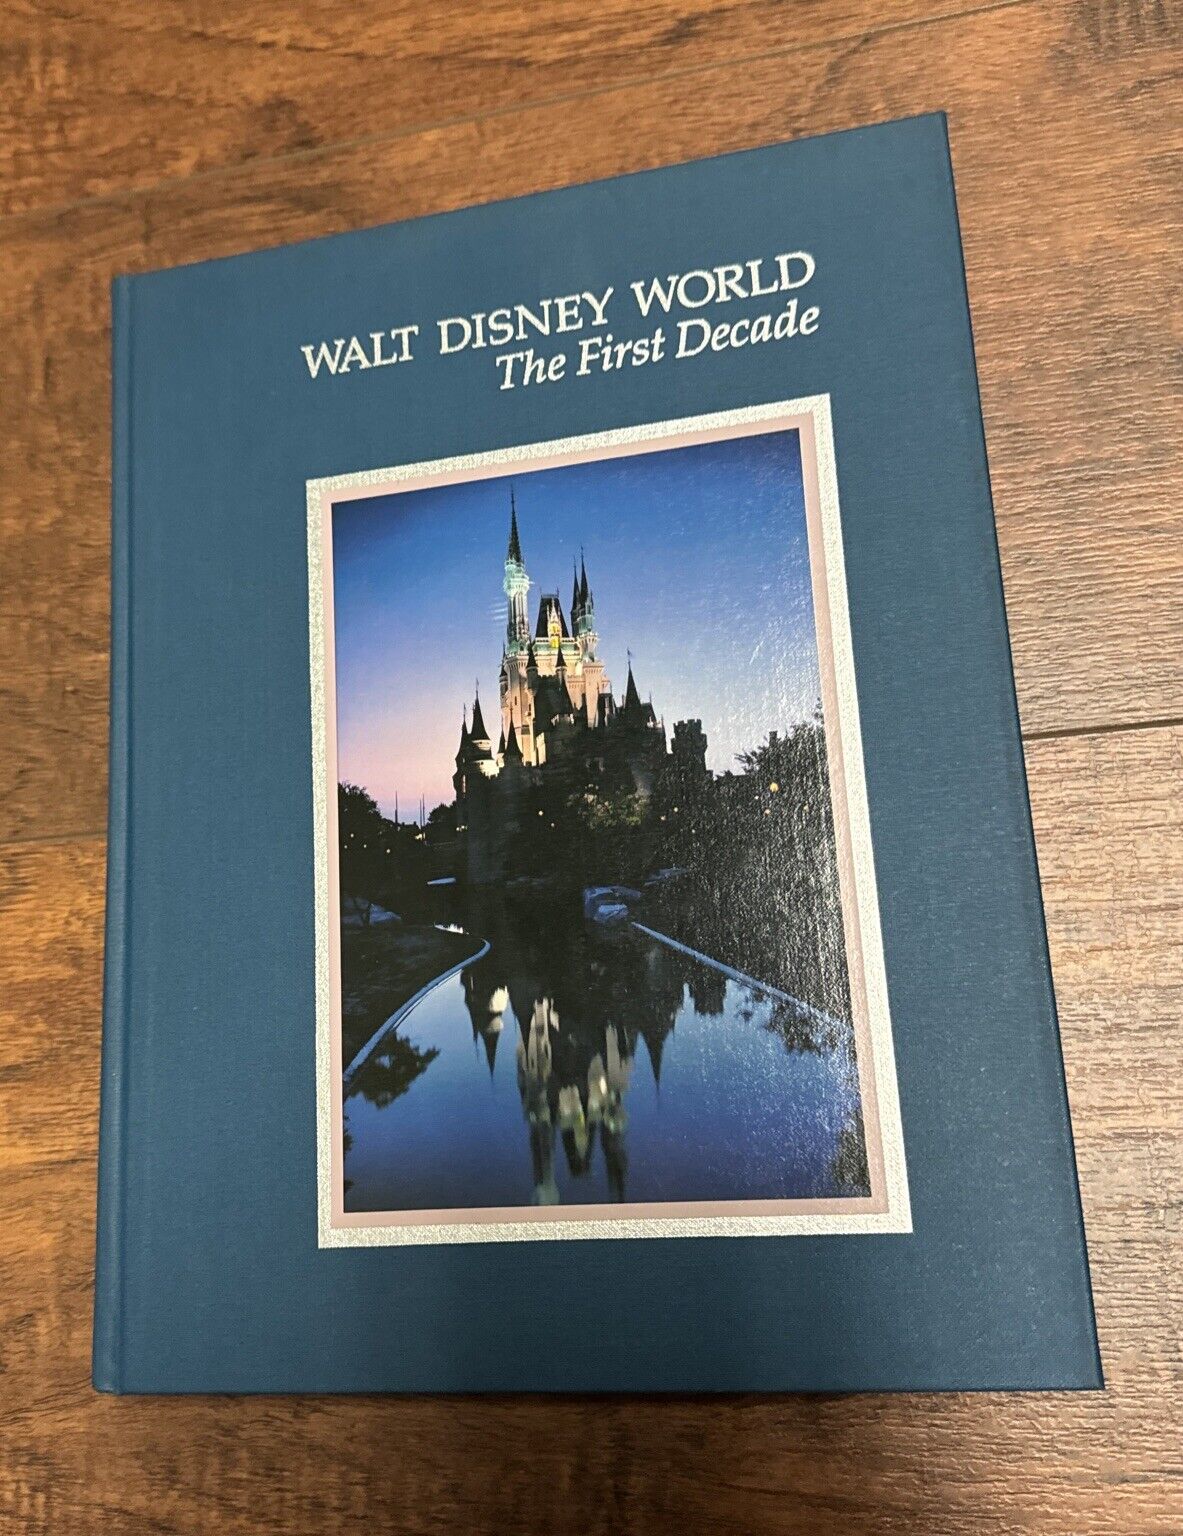 Vintage 1982 Walt Disney World The First Decade Hardcover Book Illustrated Photo